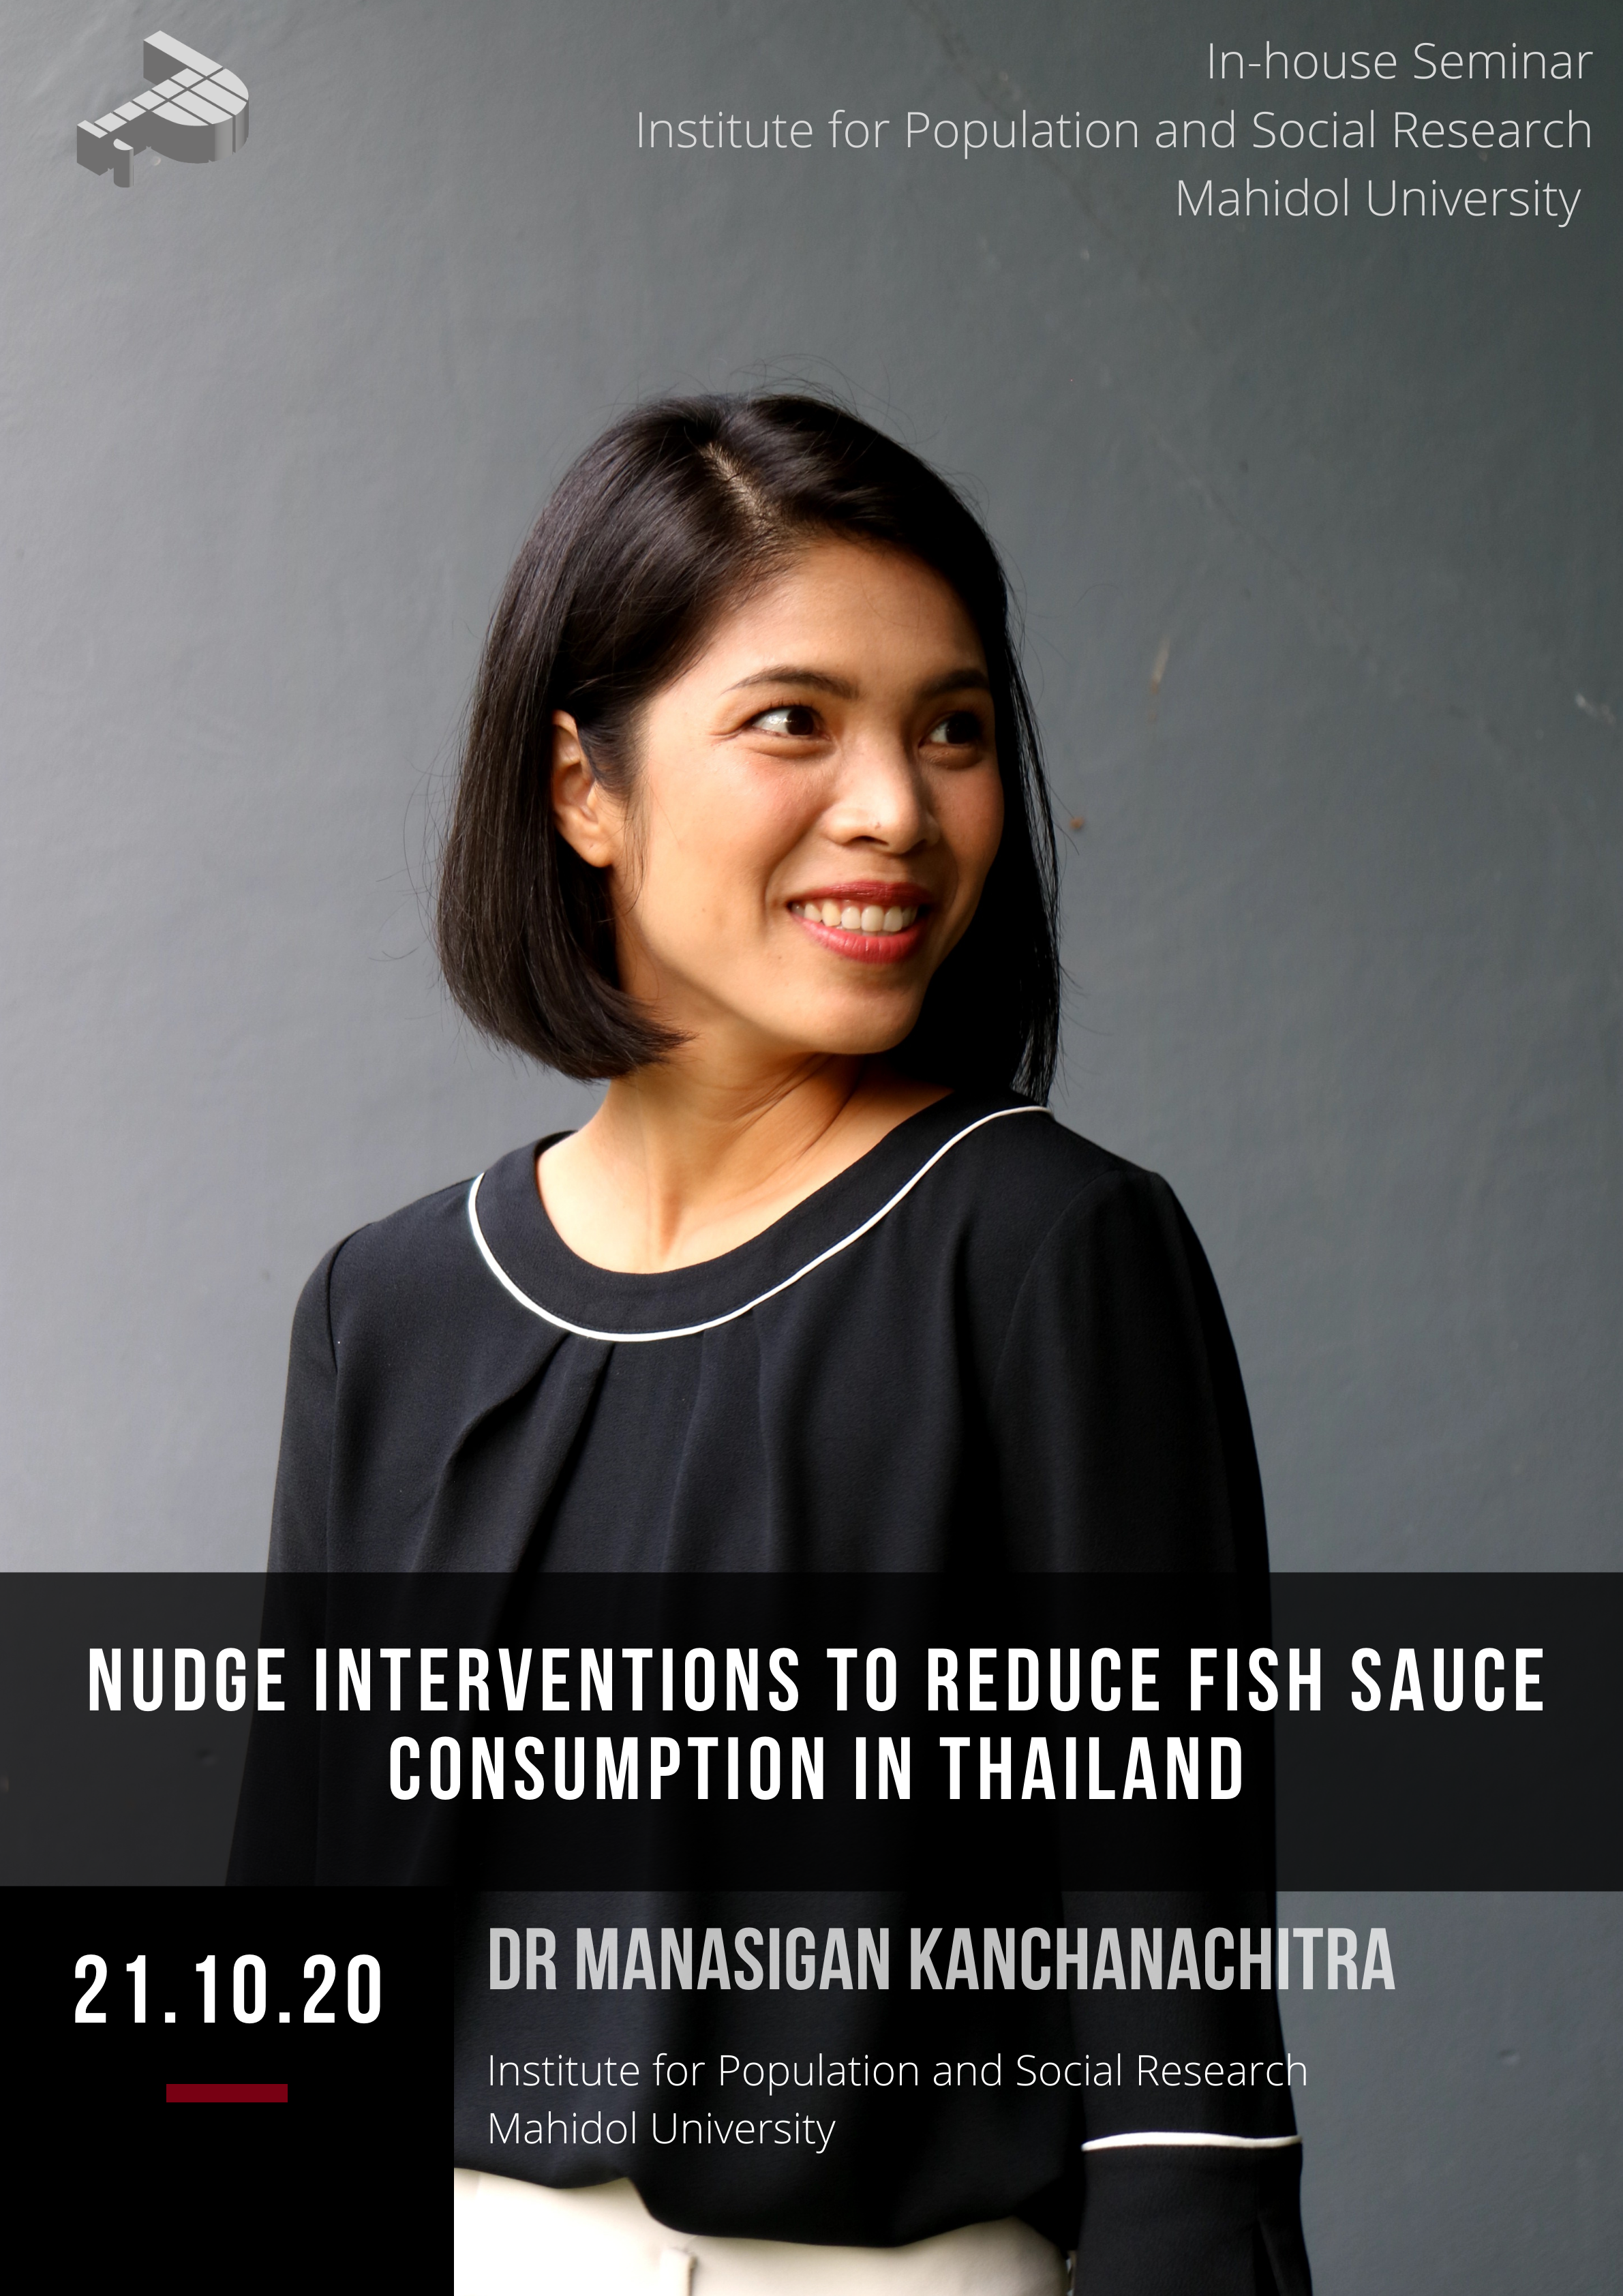 Nudge Interventions to Reduce Fish Sauce Consumption in Thailand